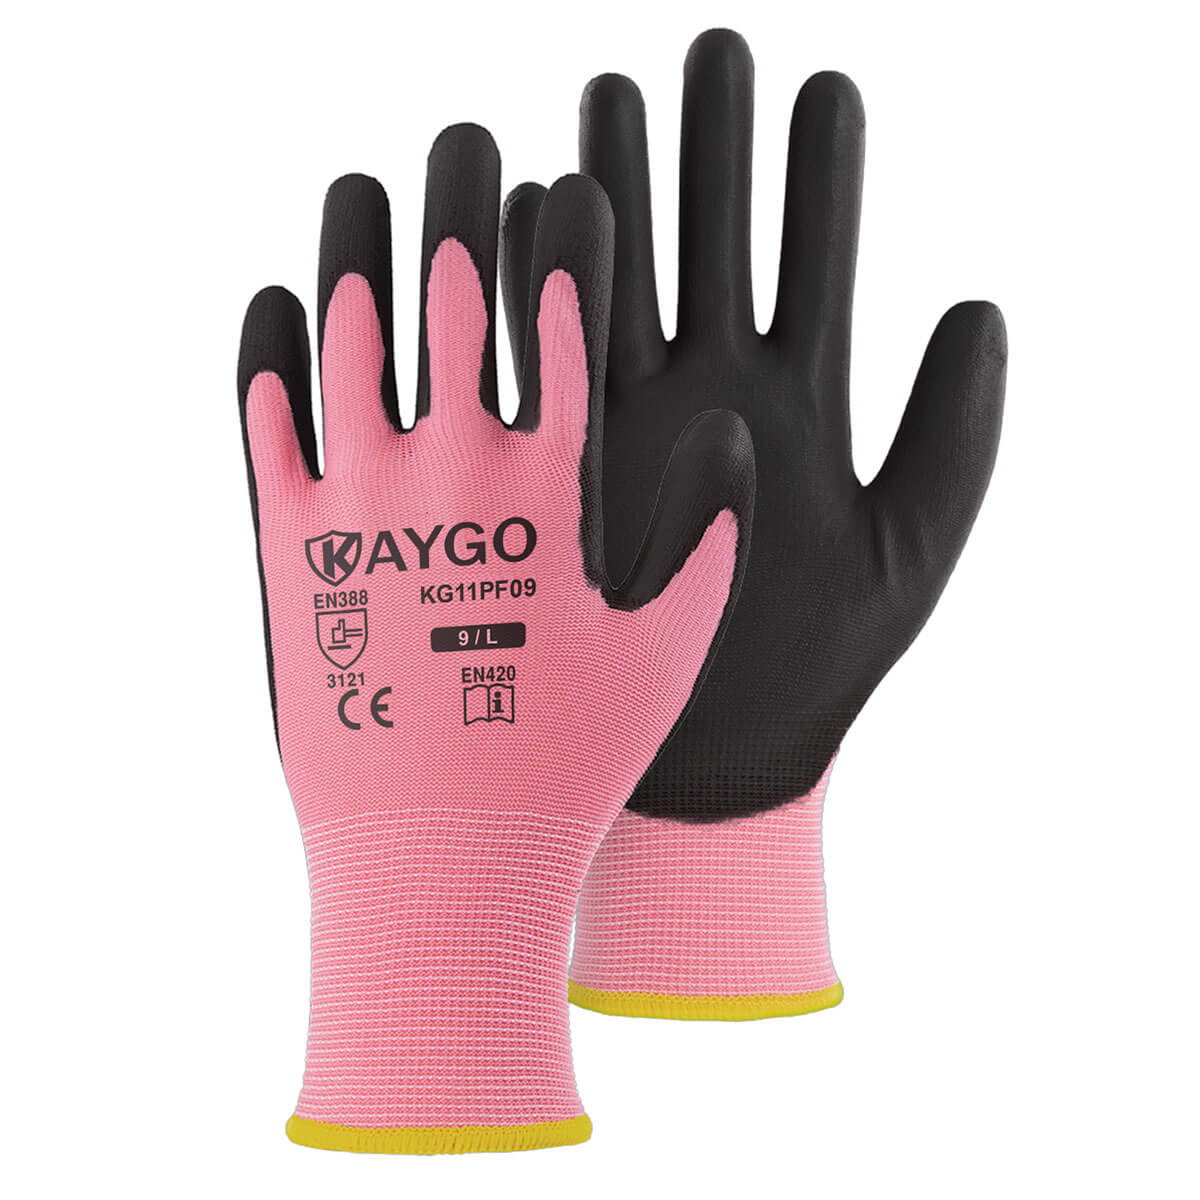 KAYGO KG22N Seamless Knit Cut Resistant Work Gloves with Nitrile Coated on Palm & Fingers 1 Pair / Red / Large